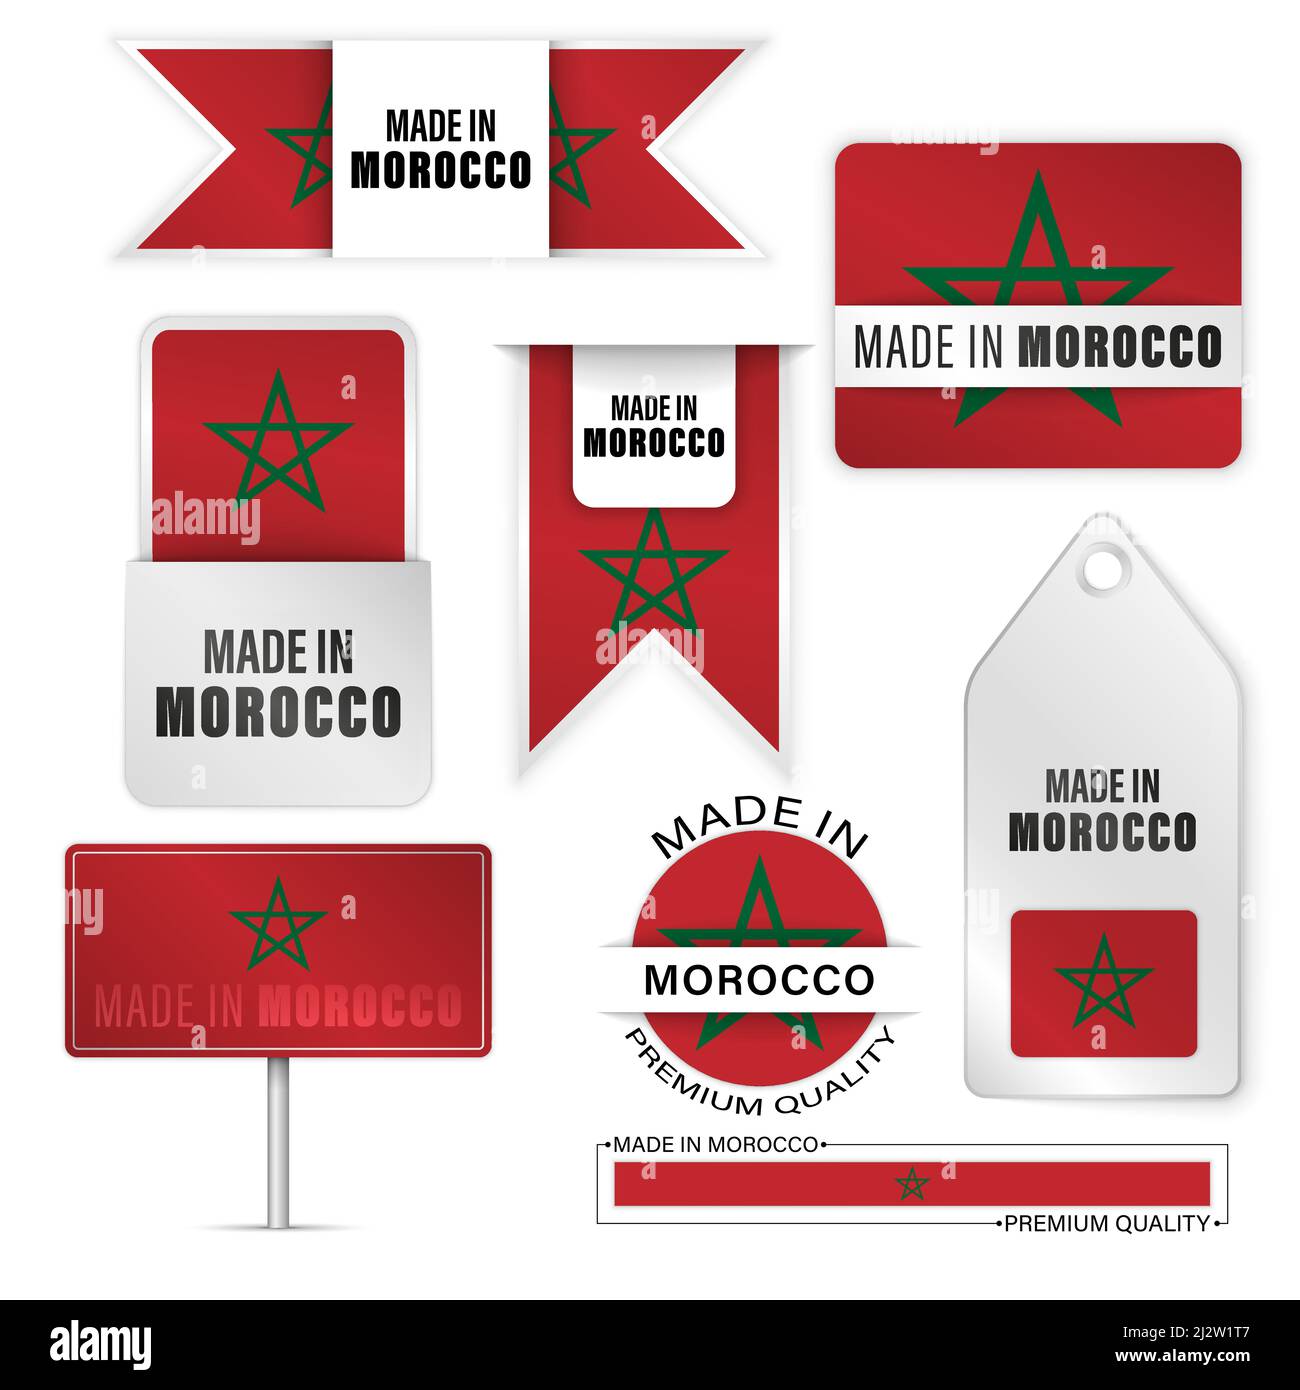 Made in Morocco graphics and labels set. Some elements of impact for the use you want to make of it. Stock Vector